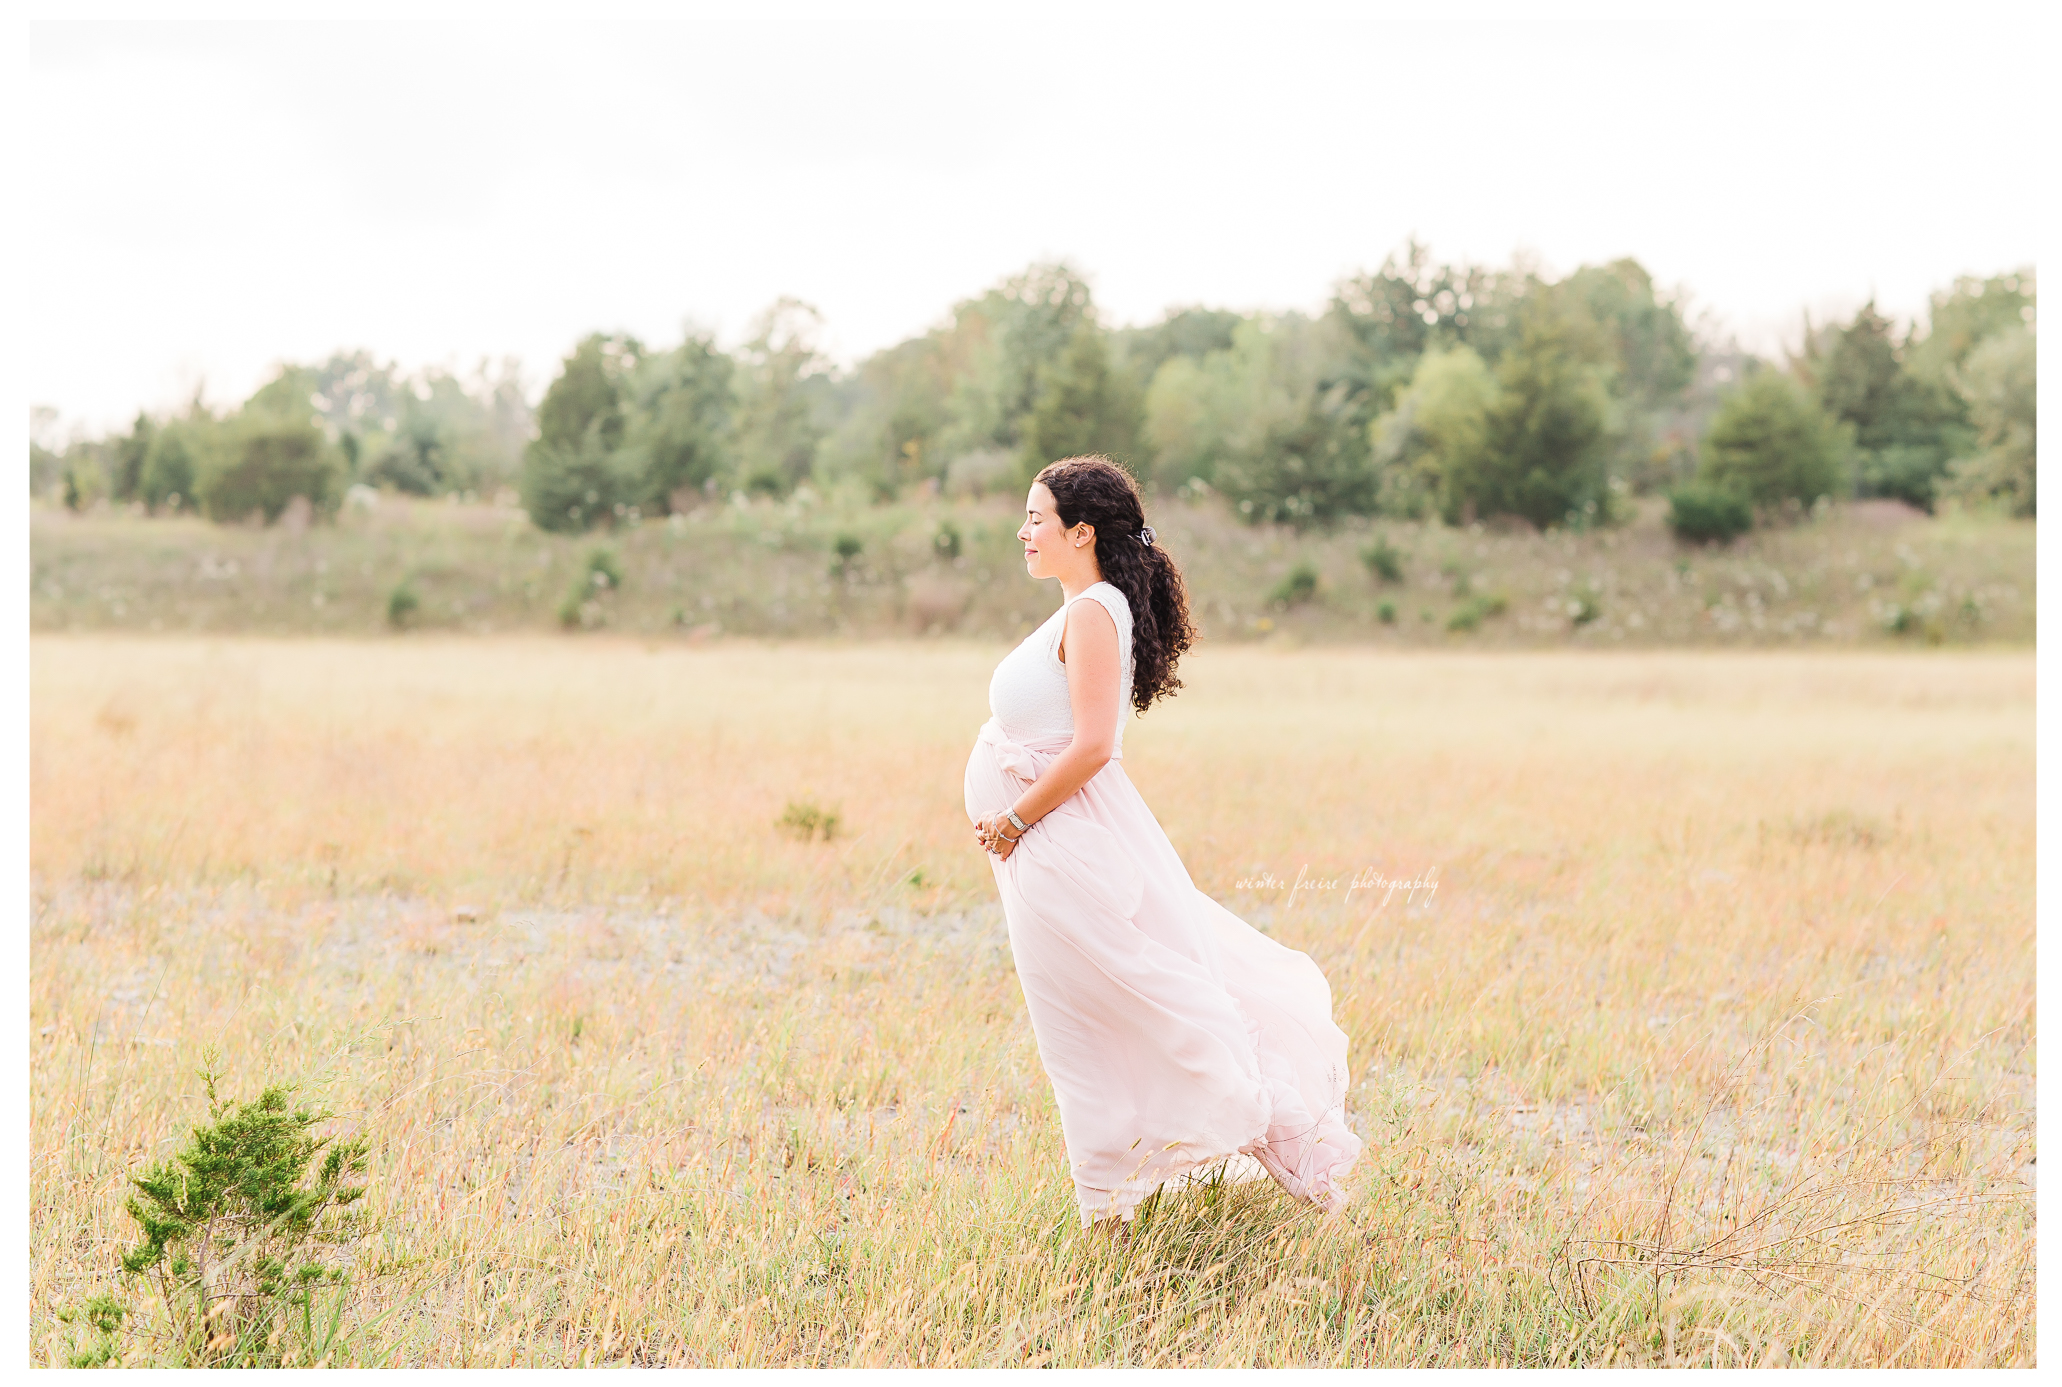 Winter Freire Photography | Sweet Pure Organic | Dayton, Ohio Maternity Photography | Dayton, Ohio Maternity Photographer | Motherhood | Maternity | Family Photographer | Family Photography | Dayton, Ohio Photographer | Dayton, Ohio Photography